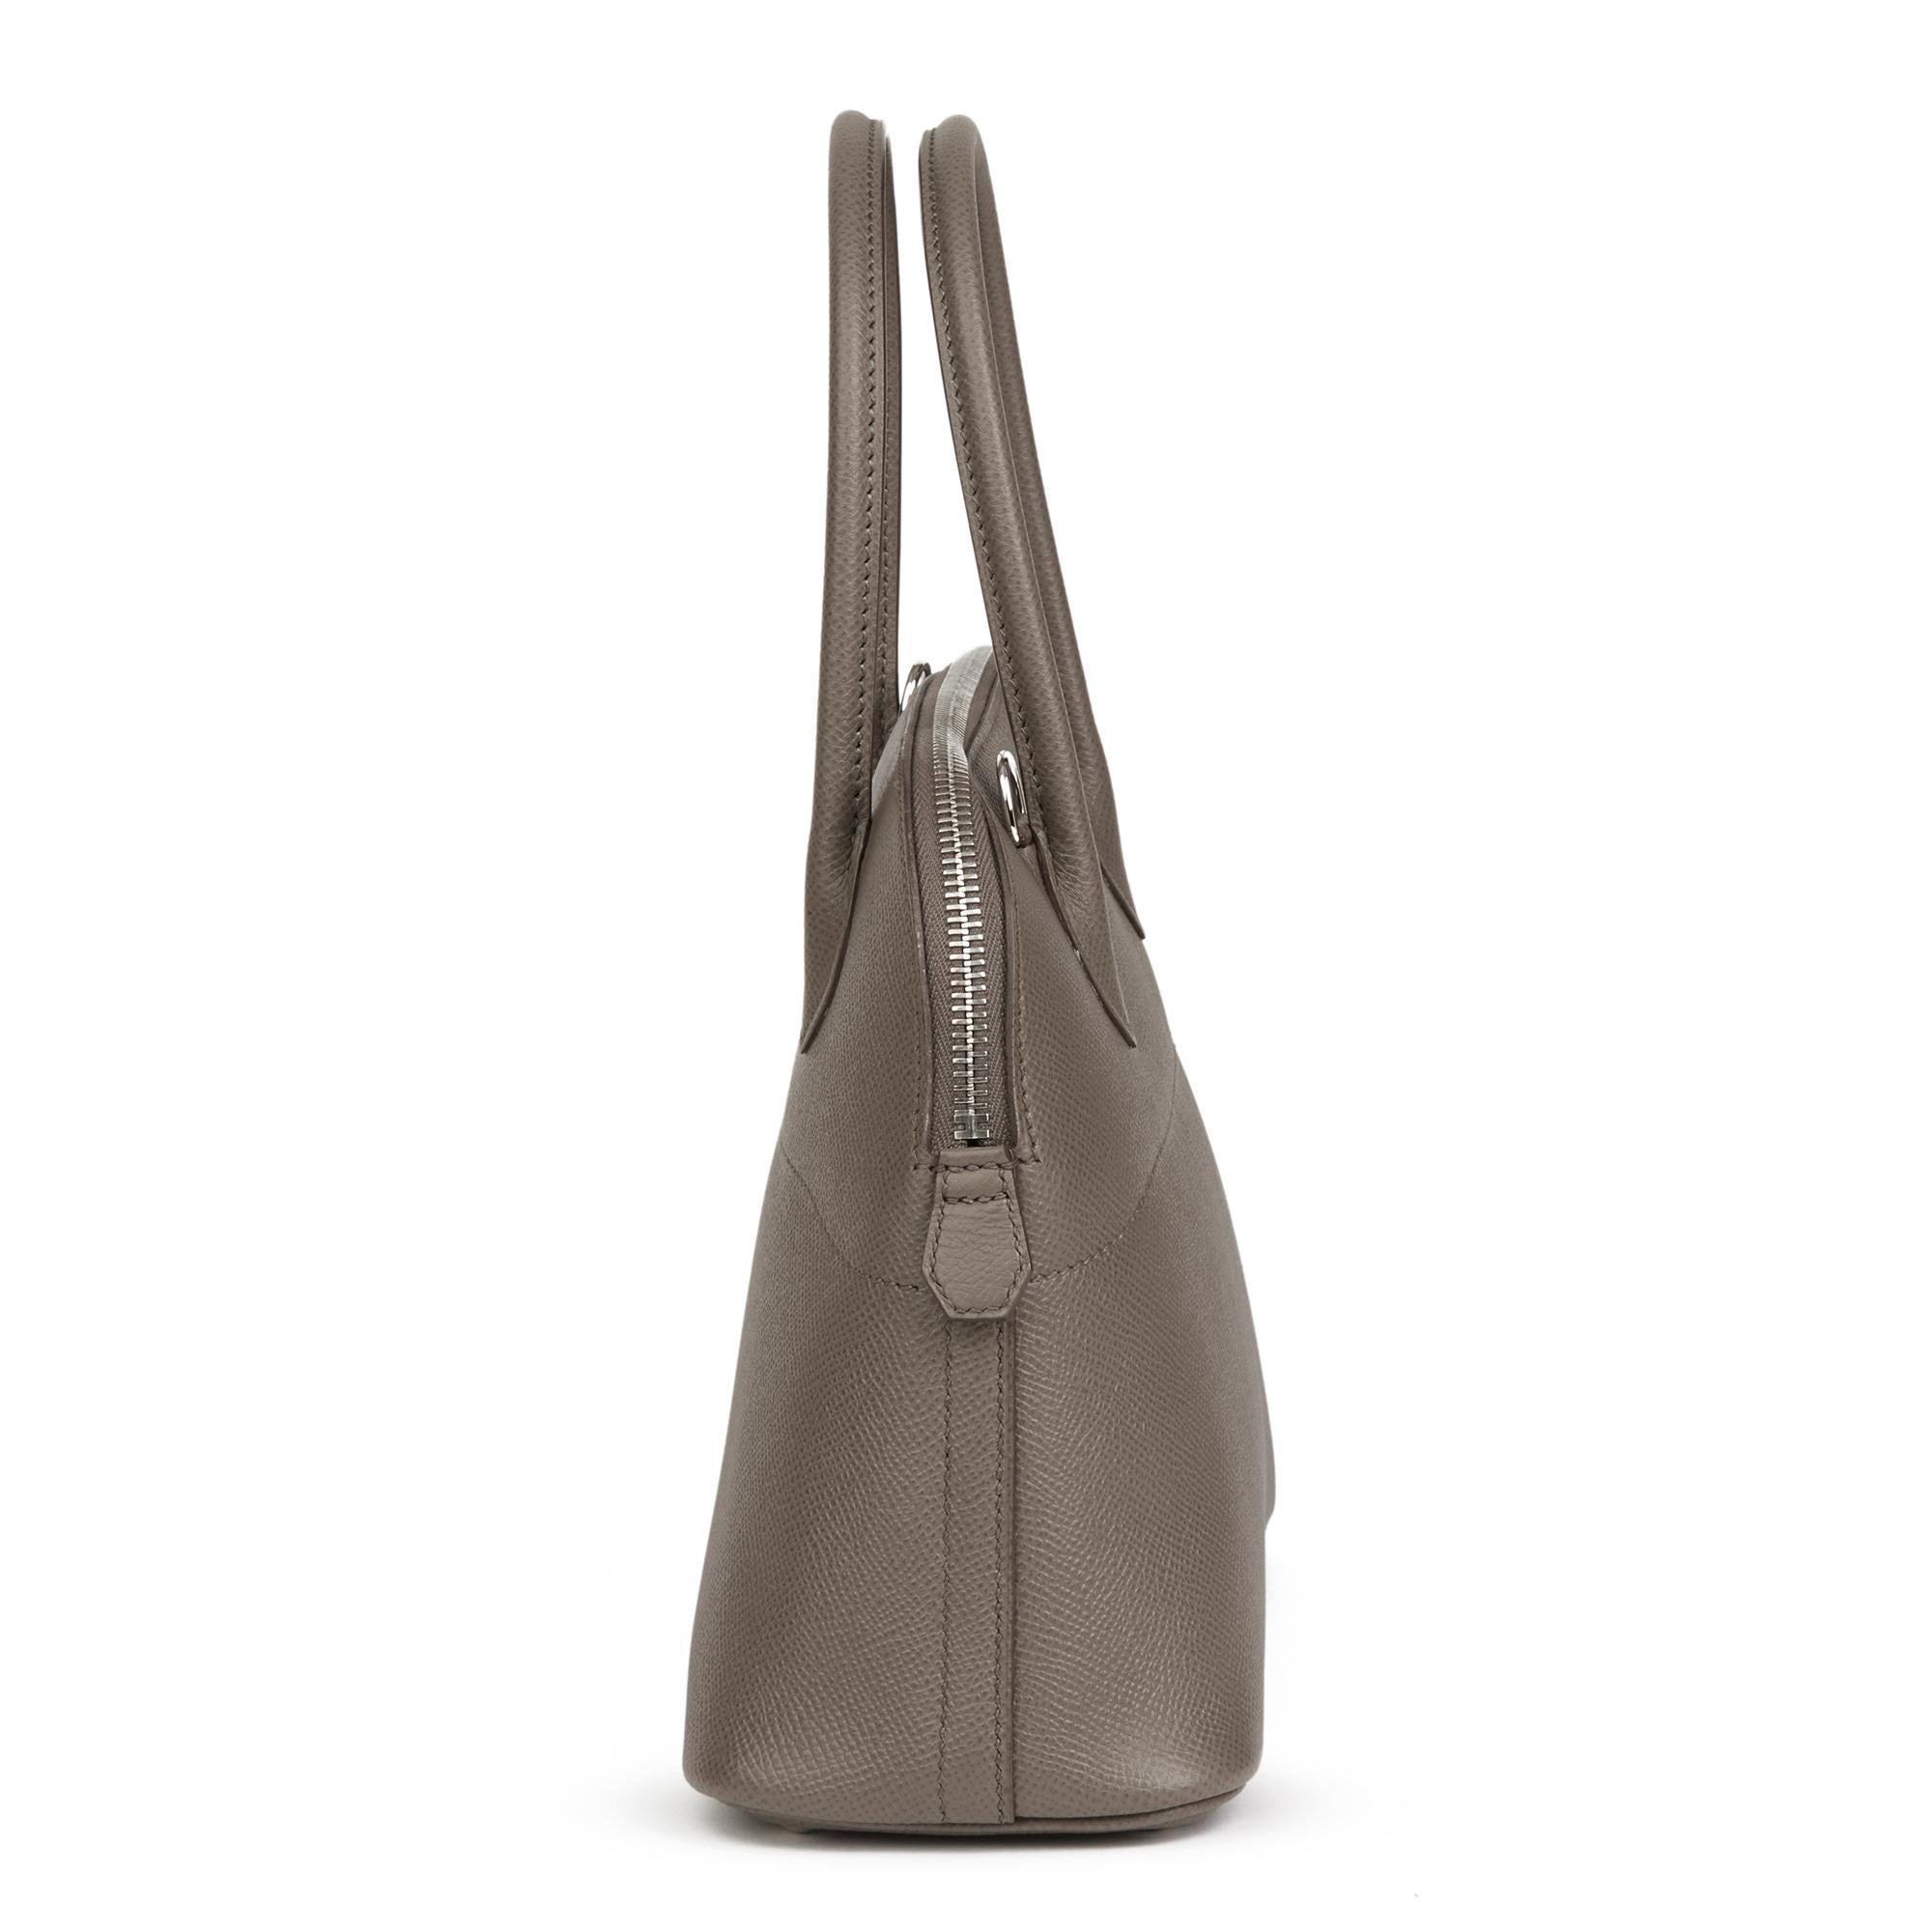 HERMÈS
Etain Epsom Leather Bolide 27cm

Reference: HB2835
Serial Number: C
Age (Circa): 2018
Accompanied By: Hermès Dust Bag, Box, Shoulder Strap, Rain Cover
Authenticity Details: Date Stamp (Made in France)
Gender: Ladies
Type: Tote,